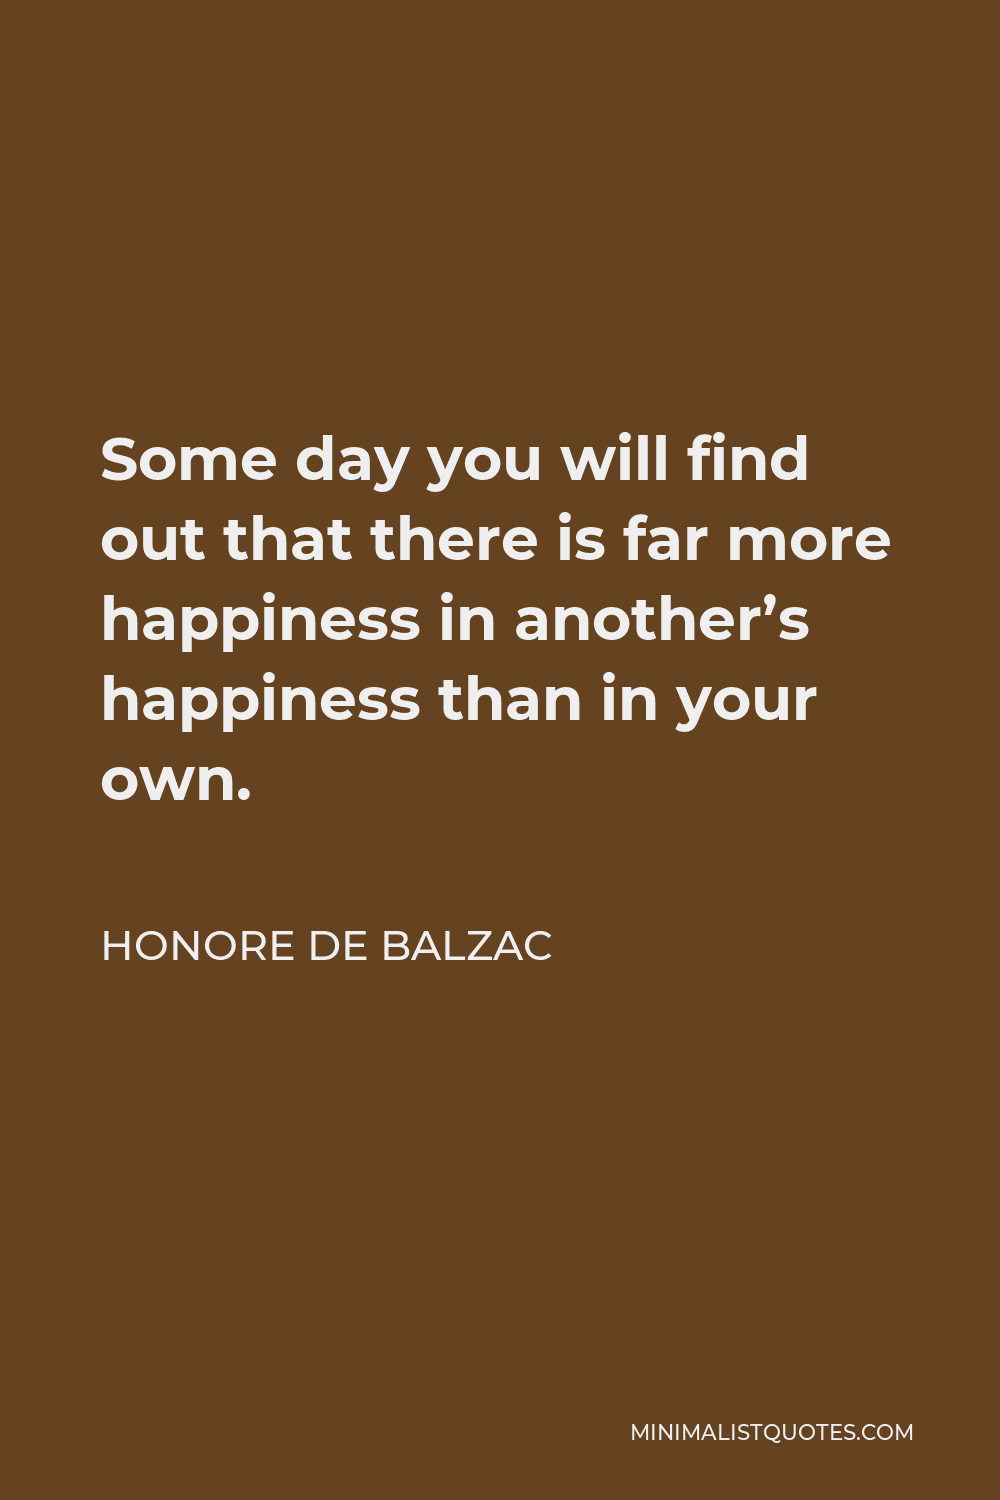 Honore de Balzac Quote - Some day you will find out that there is far more happiness in another’s happiness than in your own.